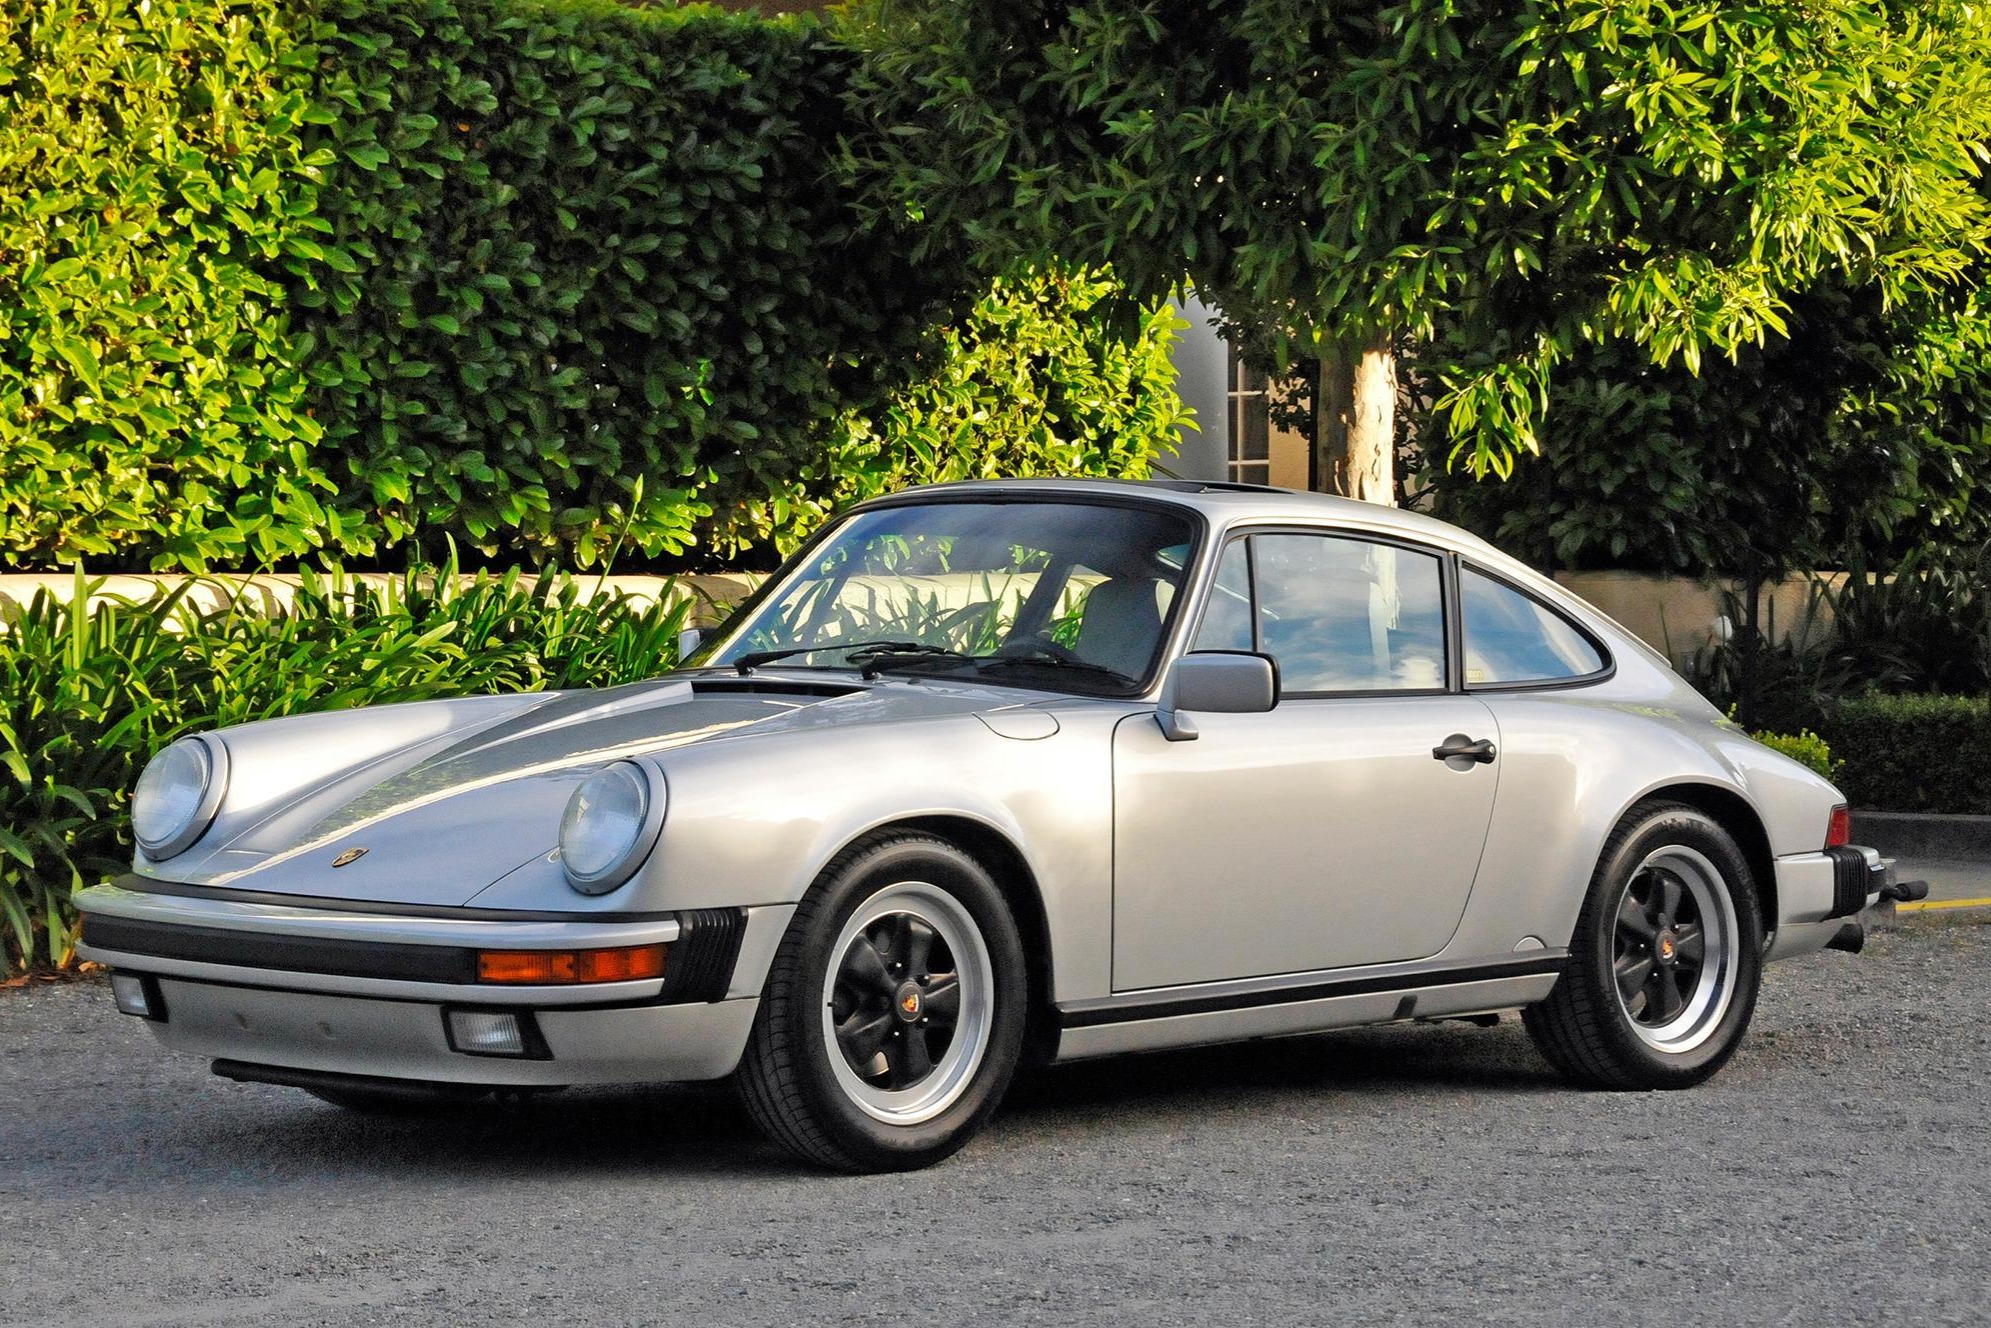 Used 15k-Mile 1988 Porsche 911 Carrera Coupe G50 Review